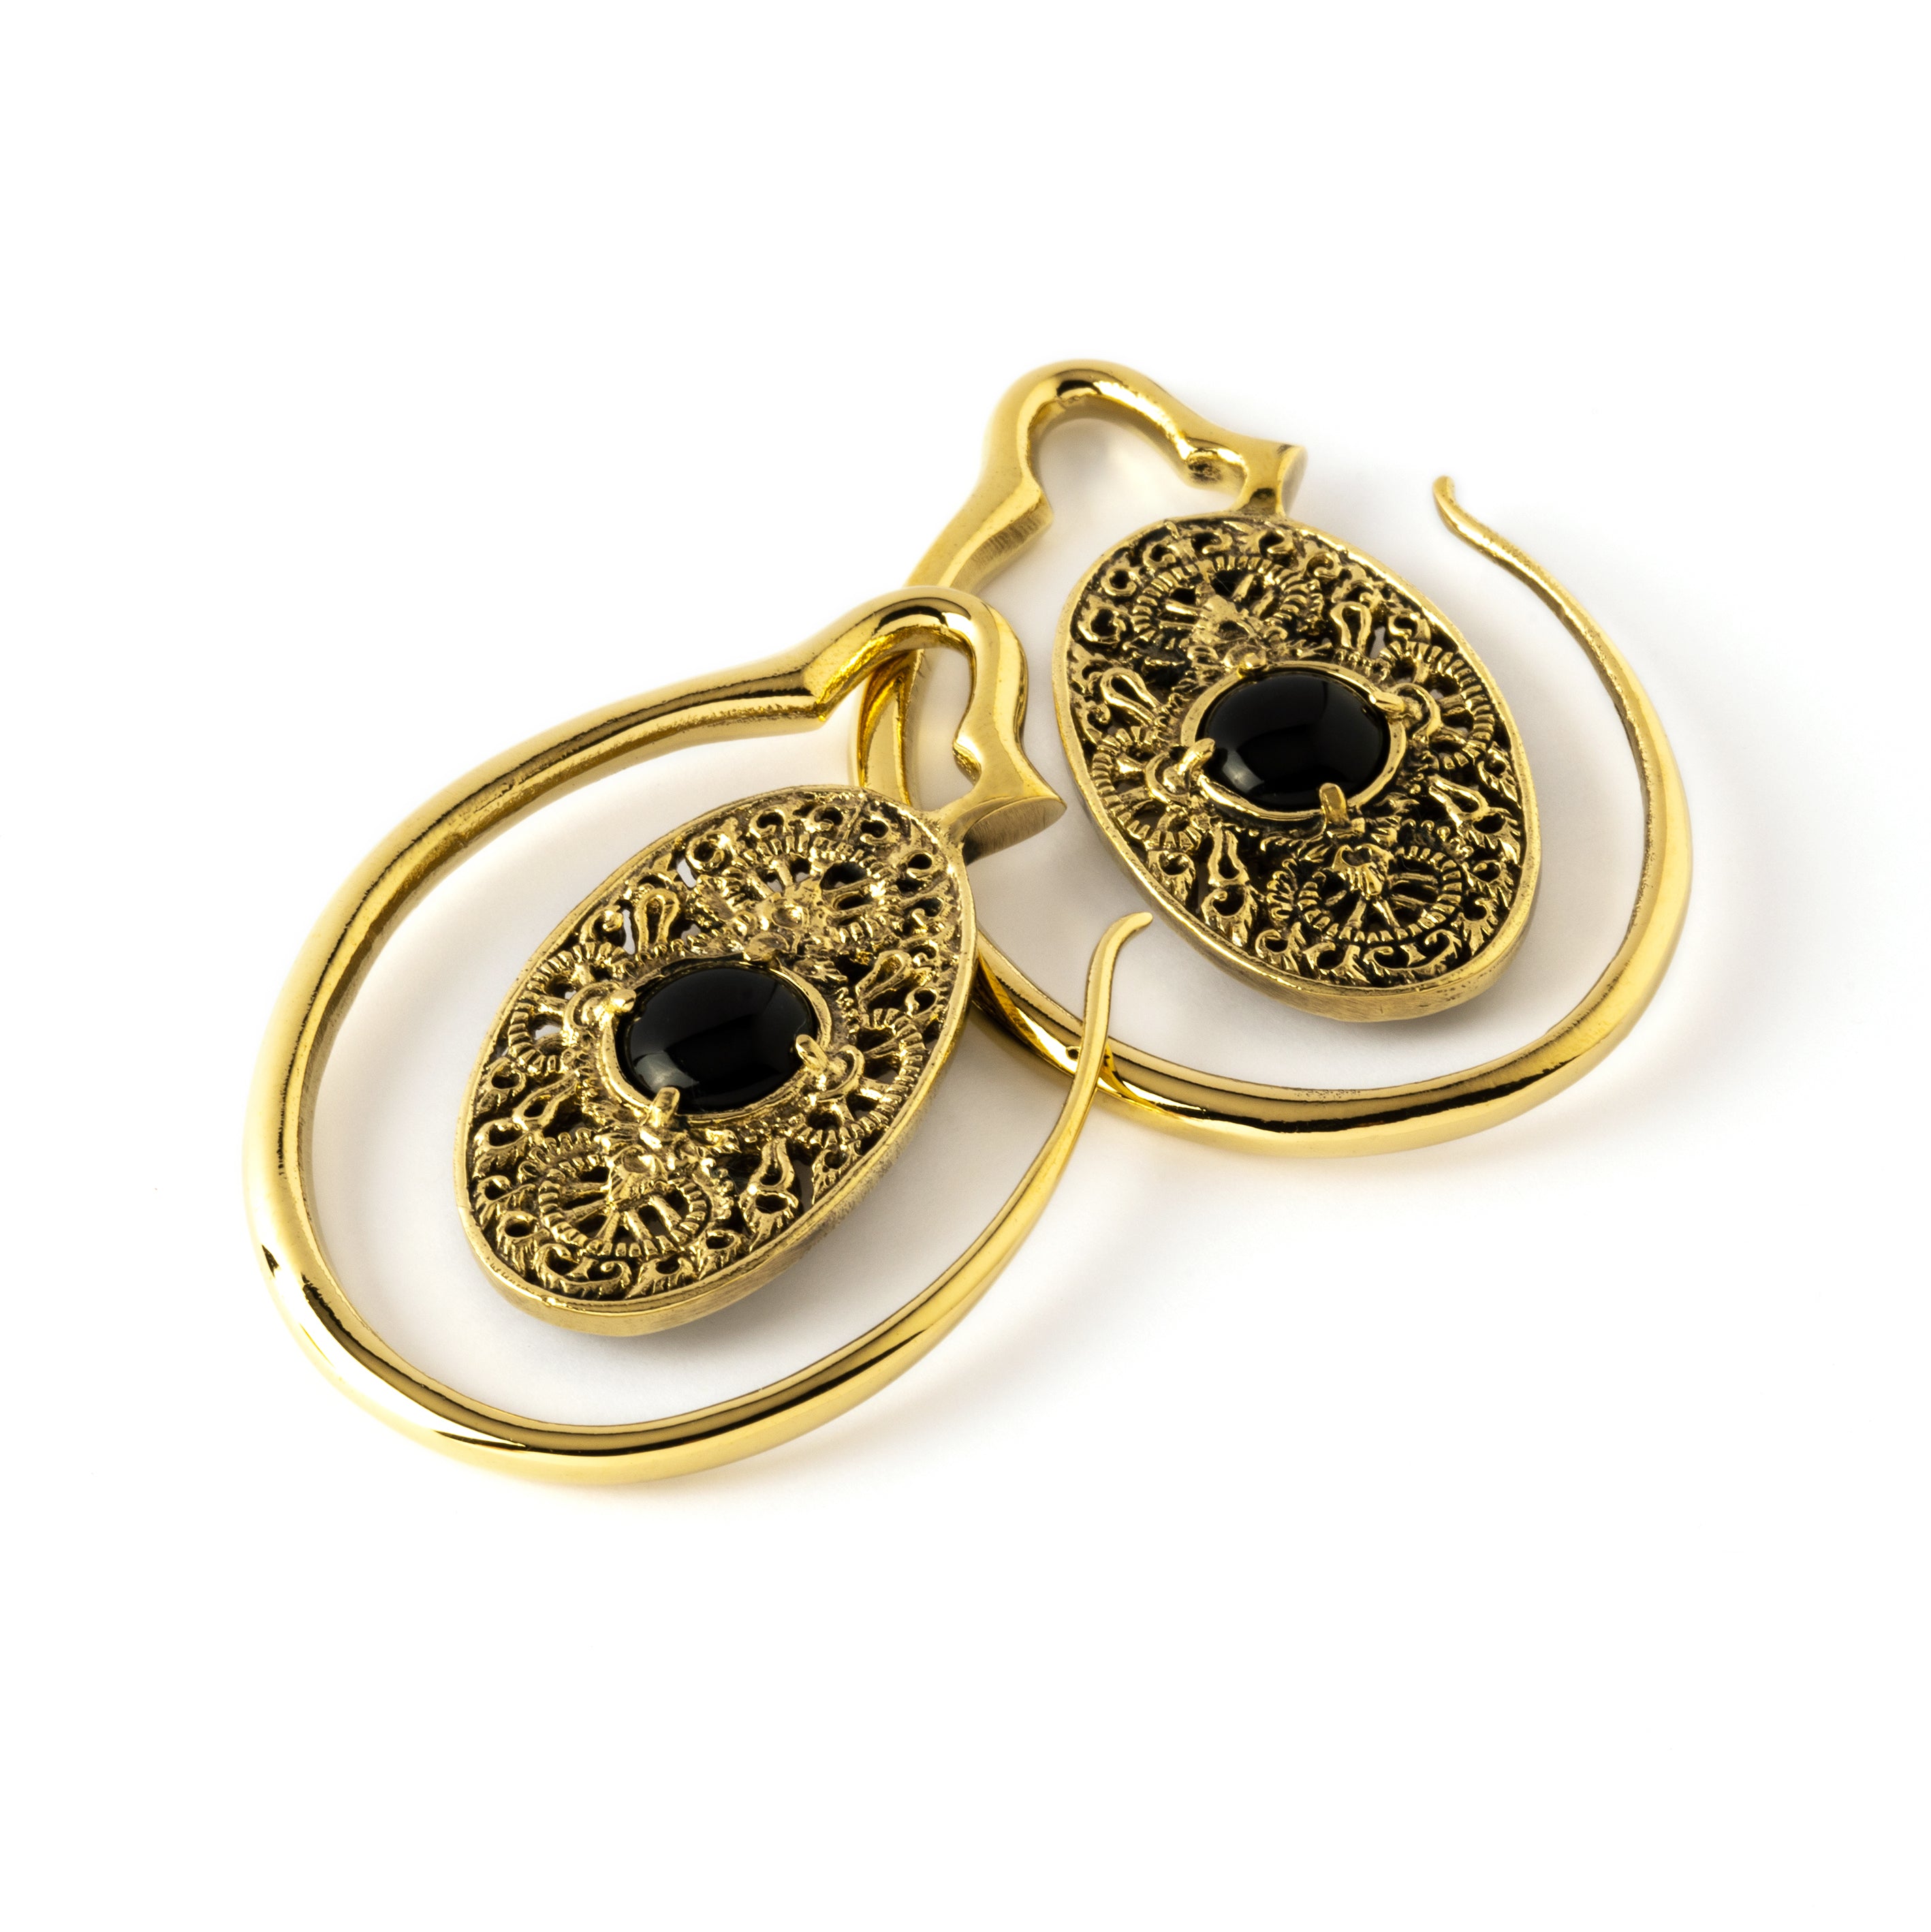 golden large ear weights hangers oval shaped with intricate filigree pattern an black onyx